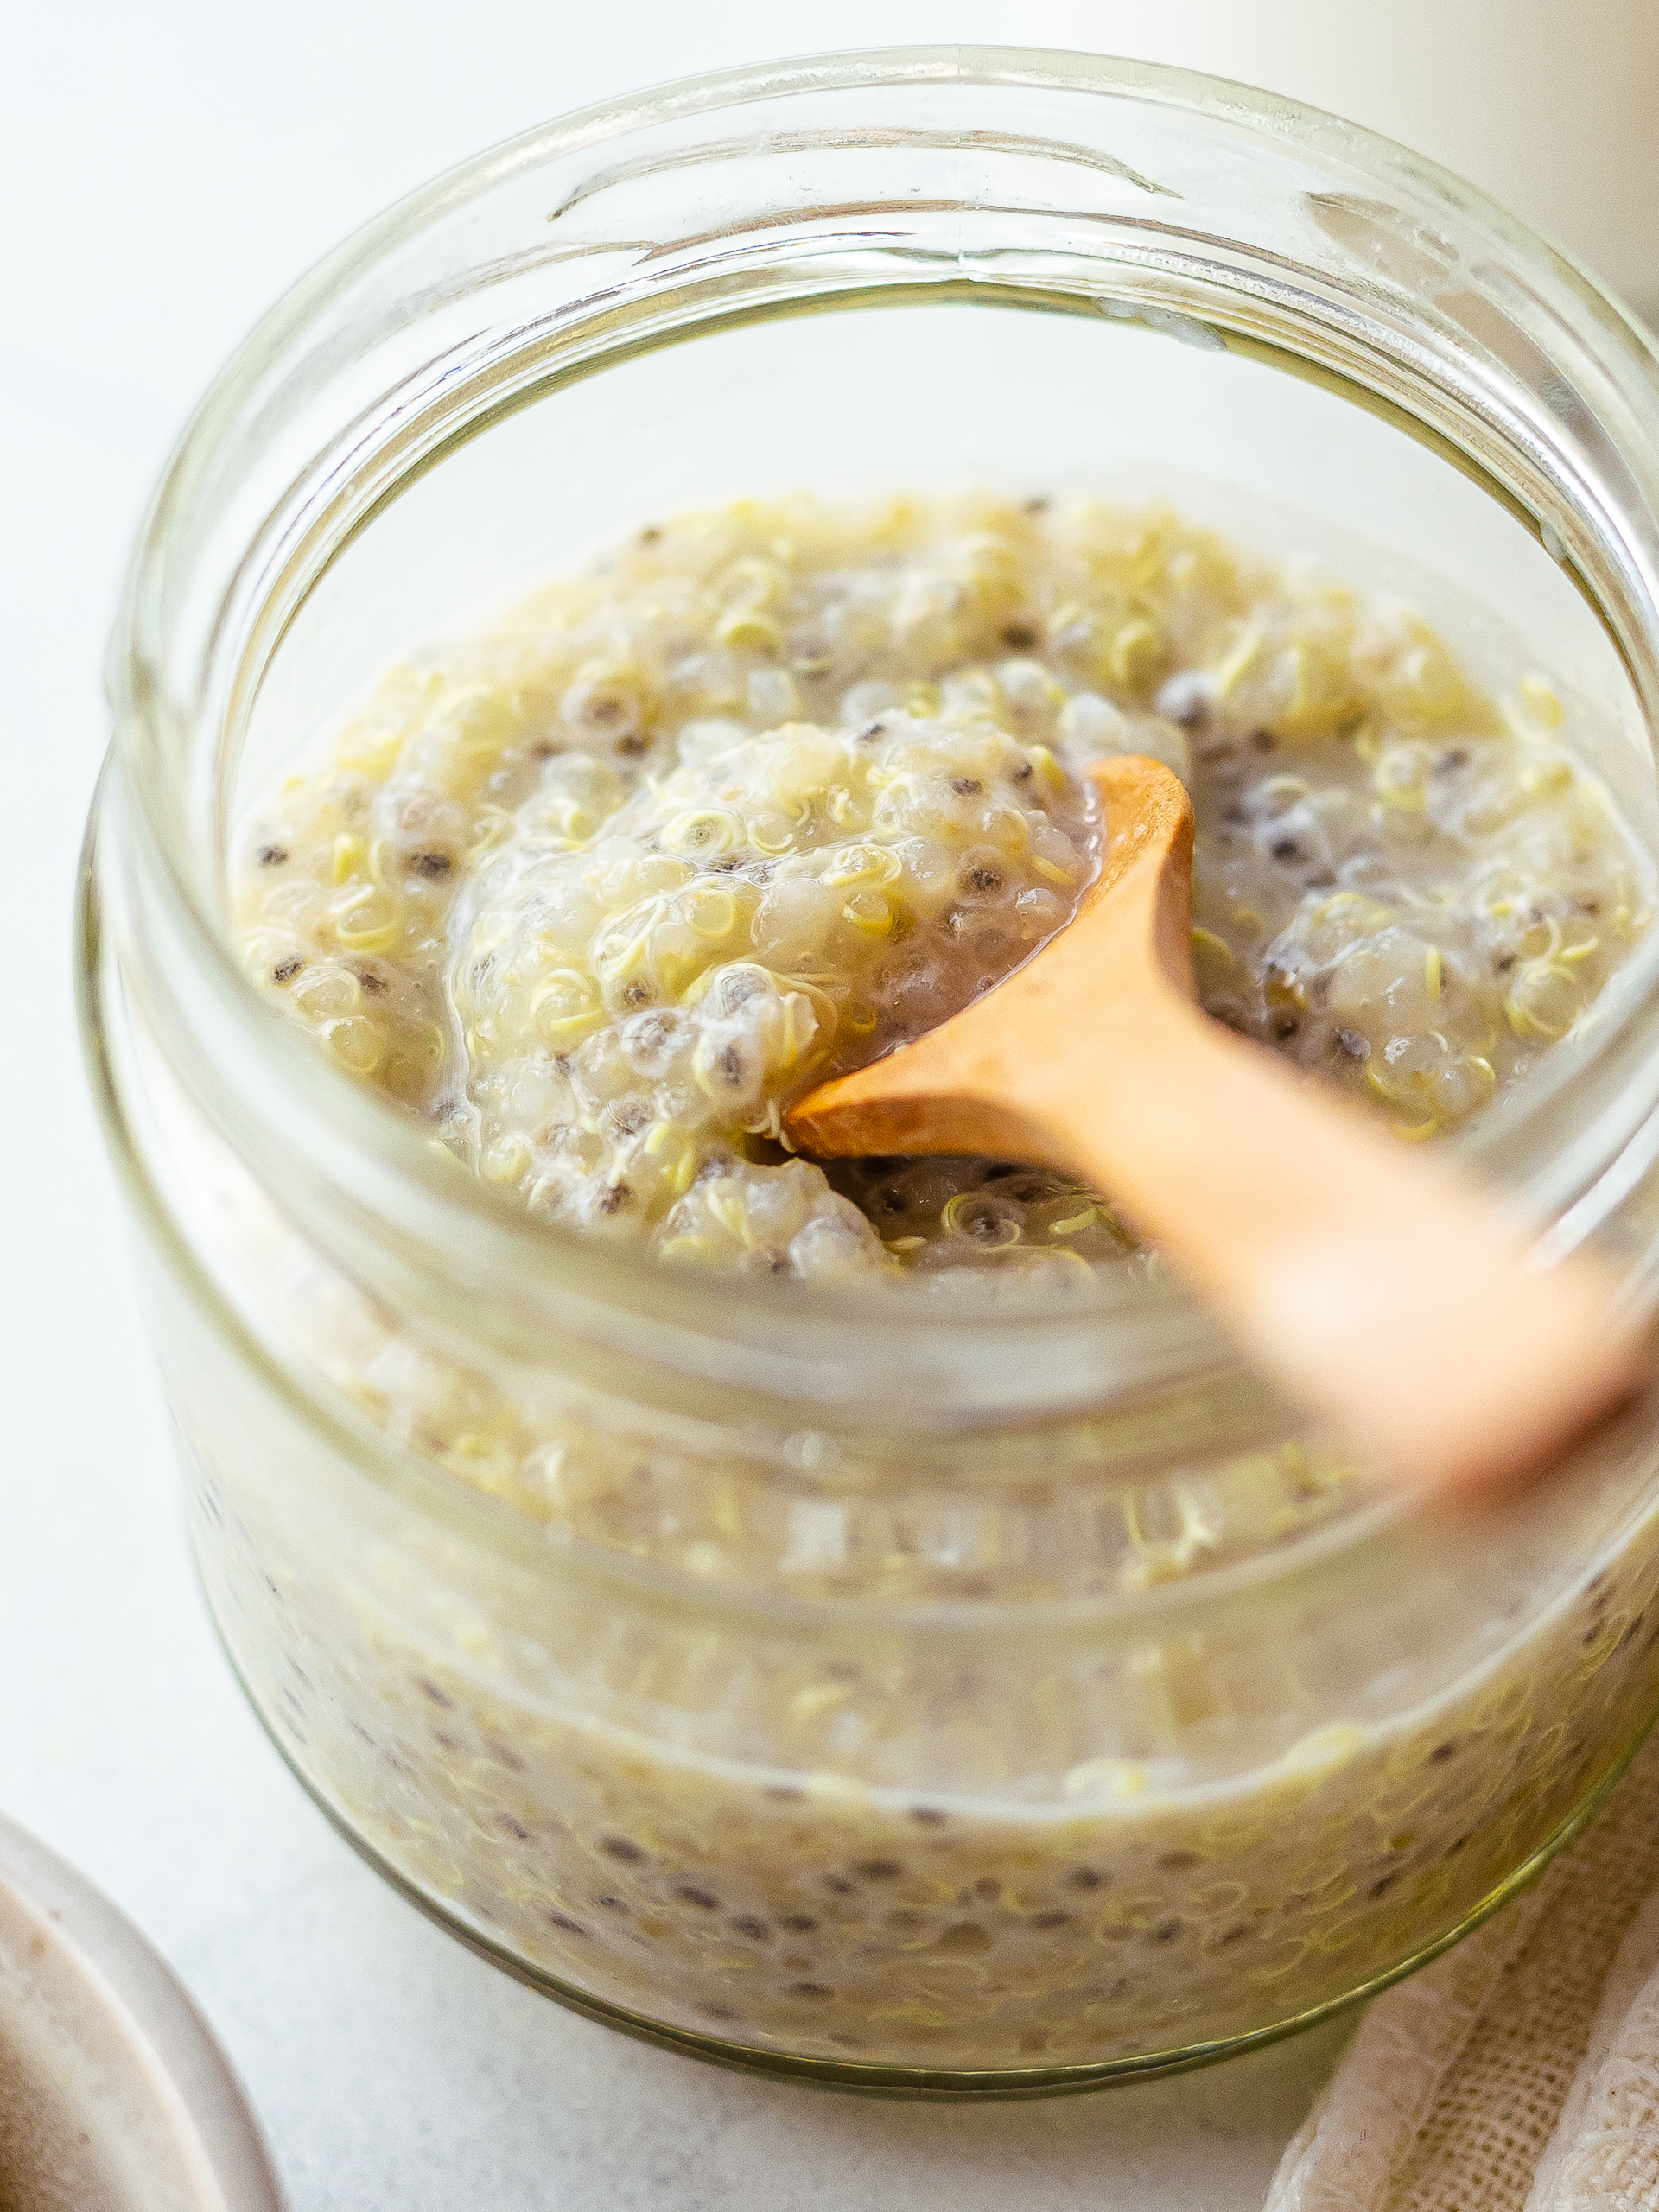 quinoa and chia seeds soaked overnight for pudding